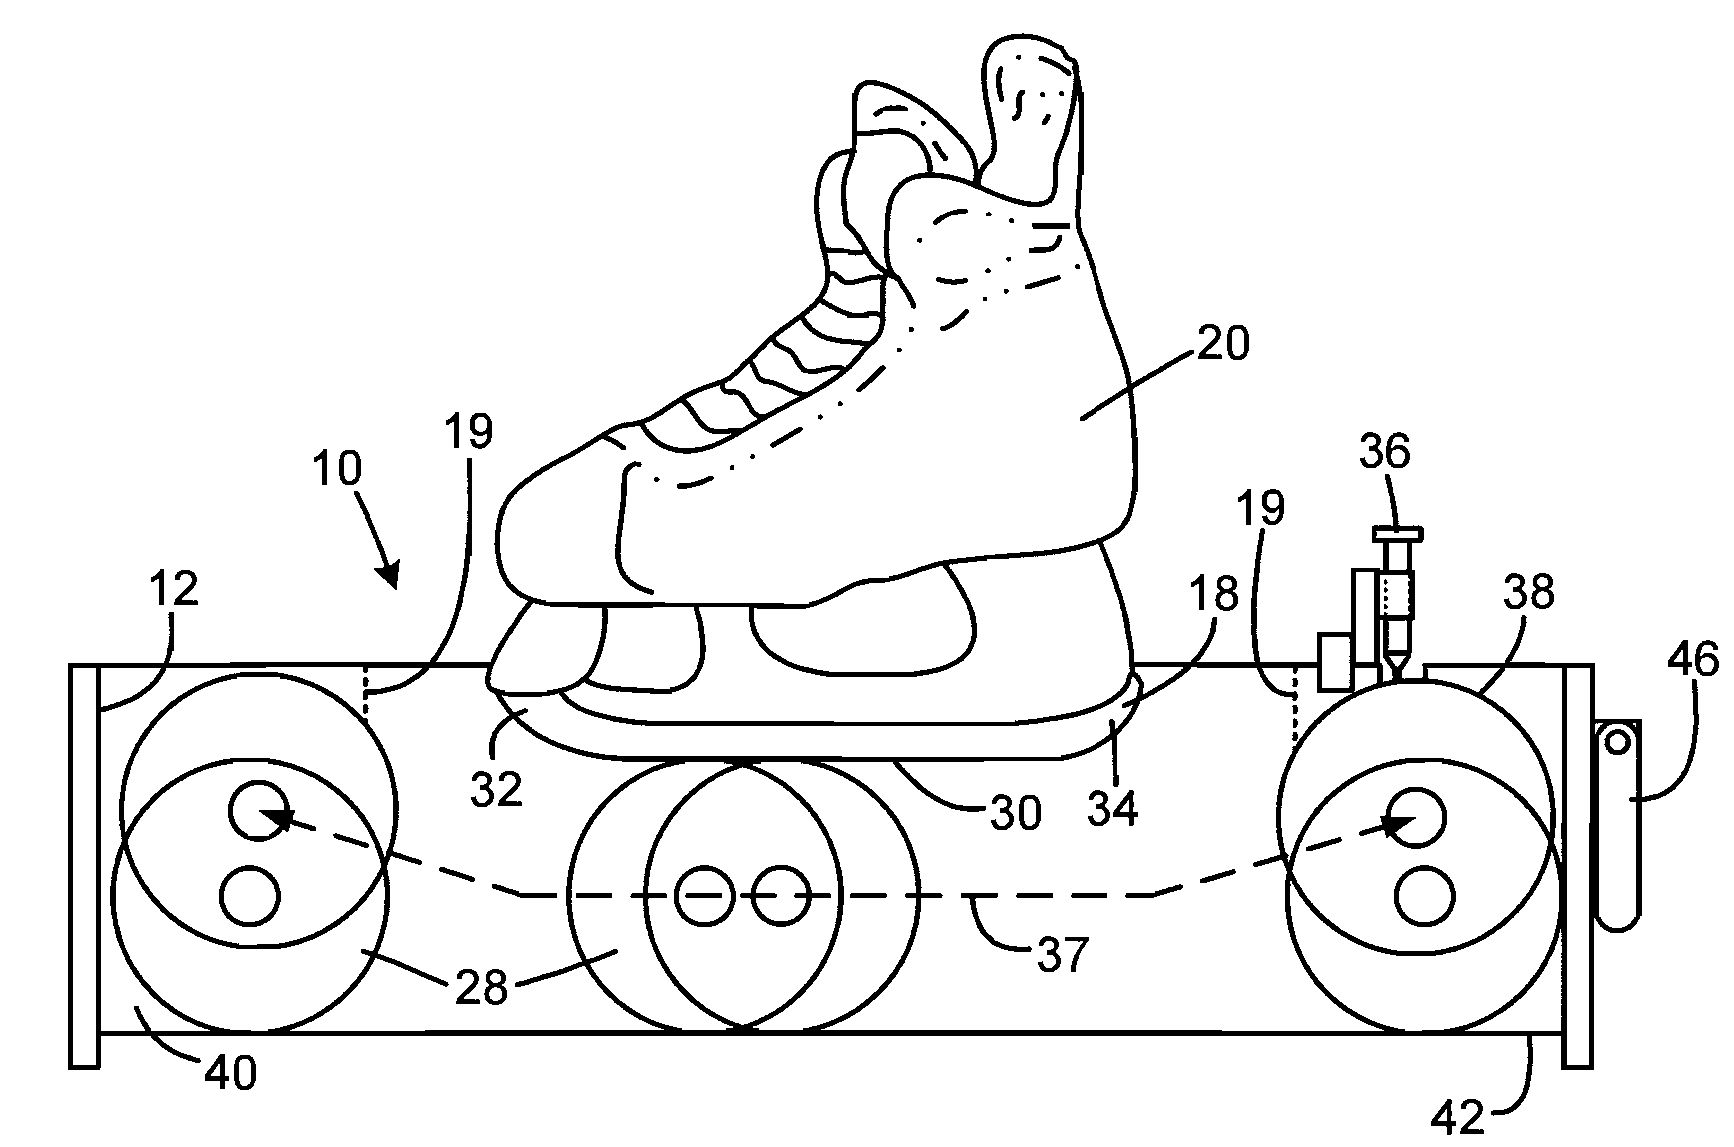 Automatic sharpening system for ice-skates